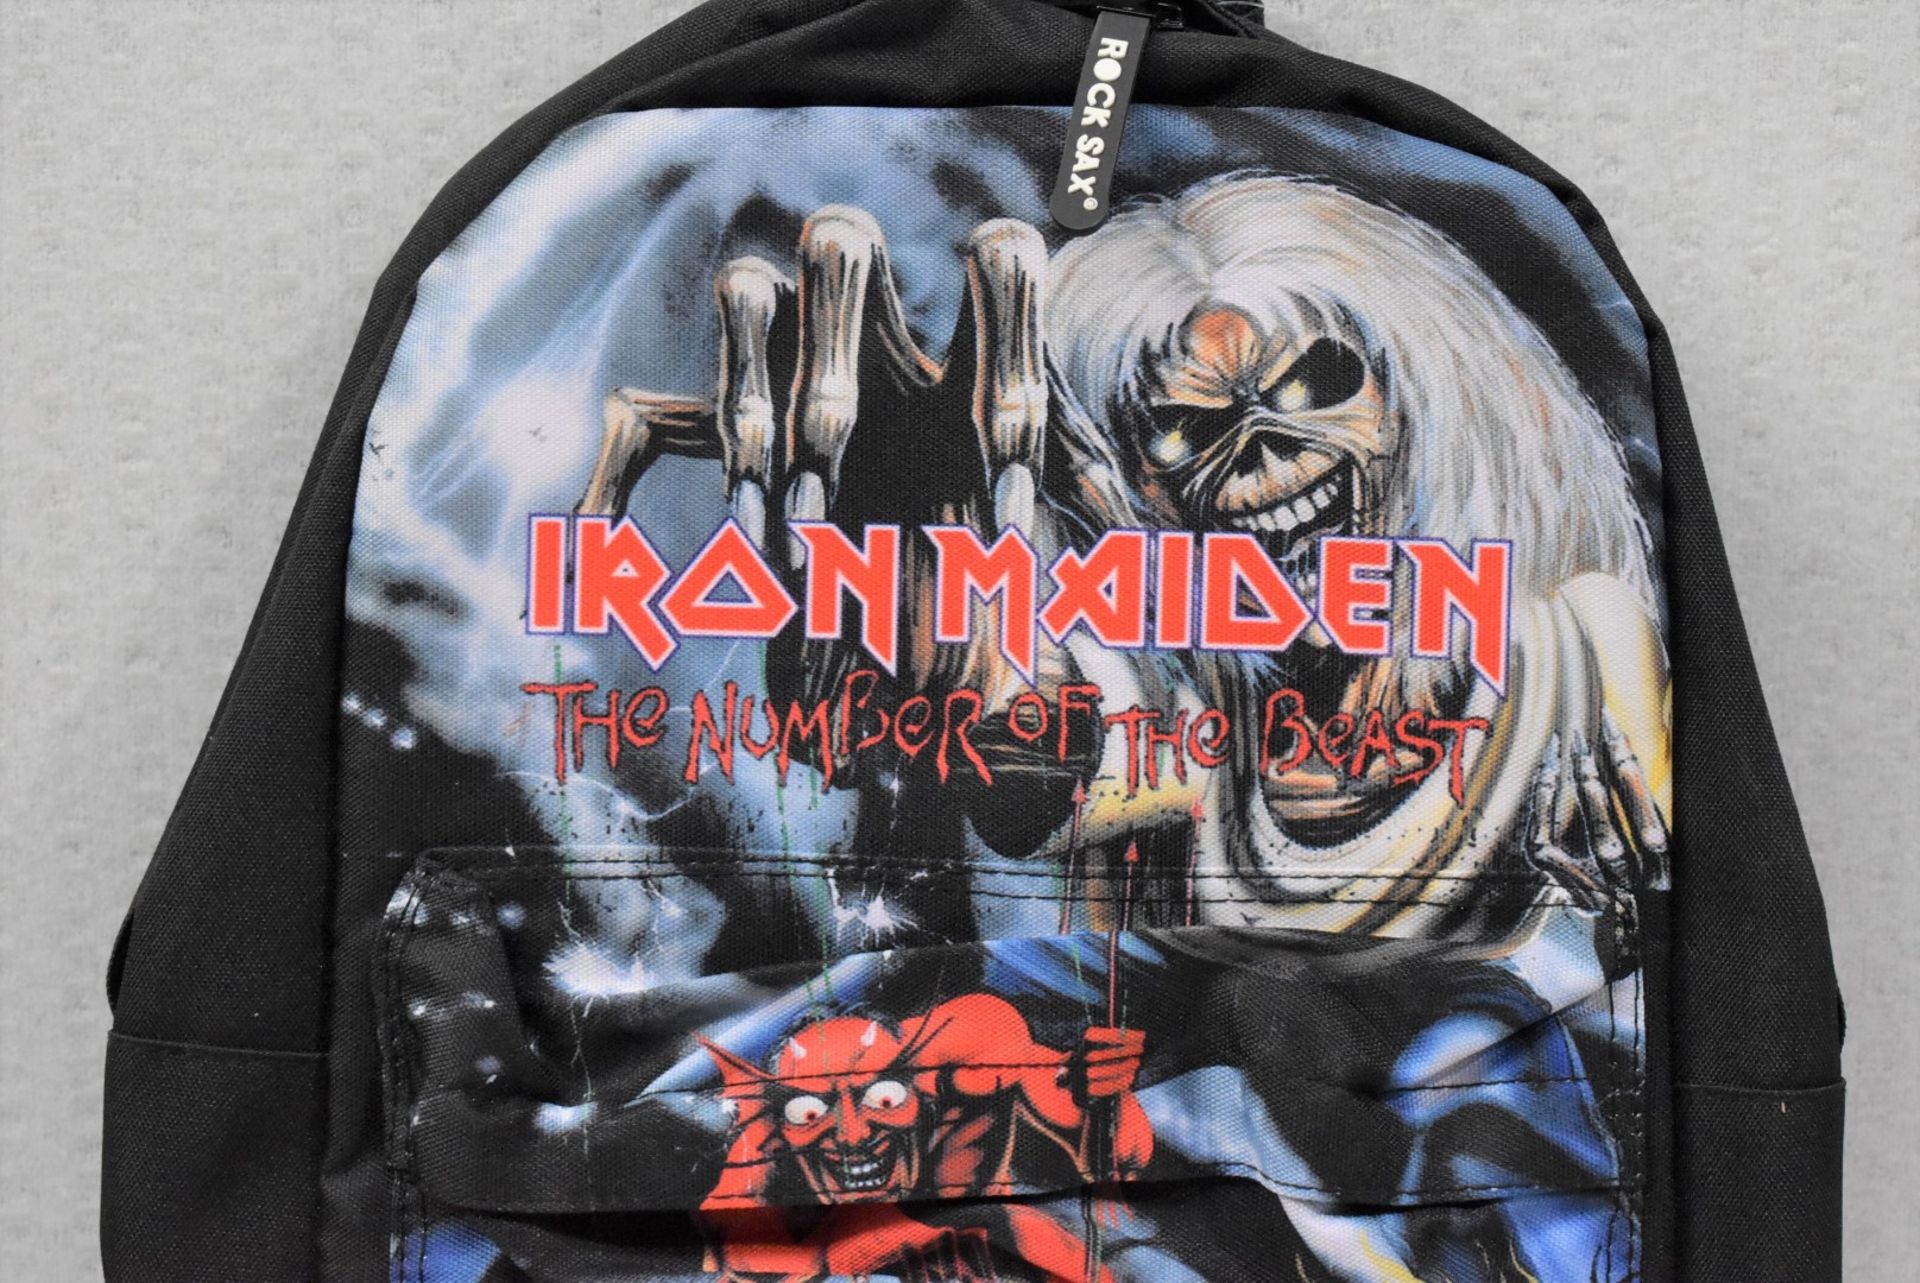 1 x Iron MaidenBackpack Bag by Rock Sax - Officially Licensed Merchandise - New & Unused - RRP £ - Image 2 of 5